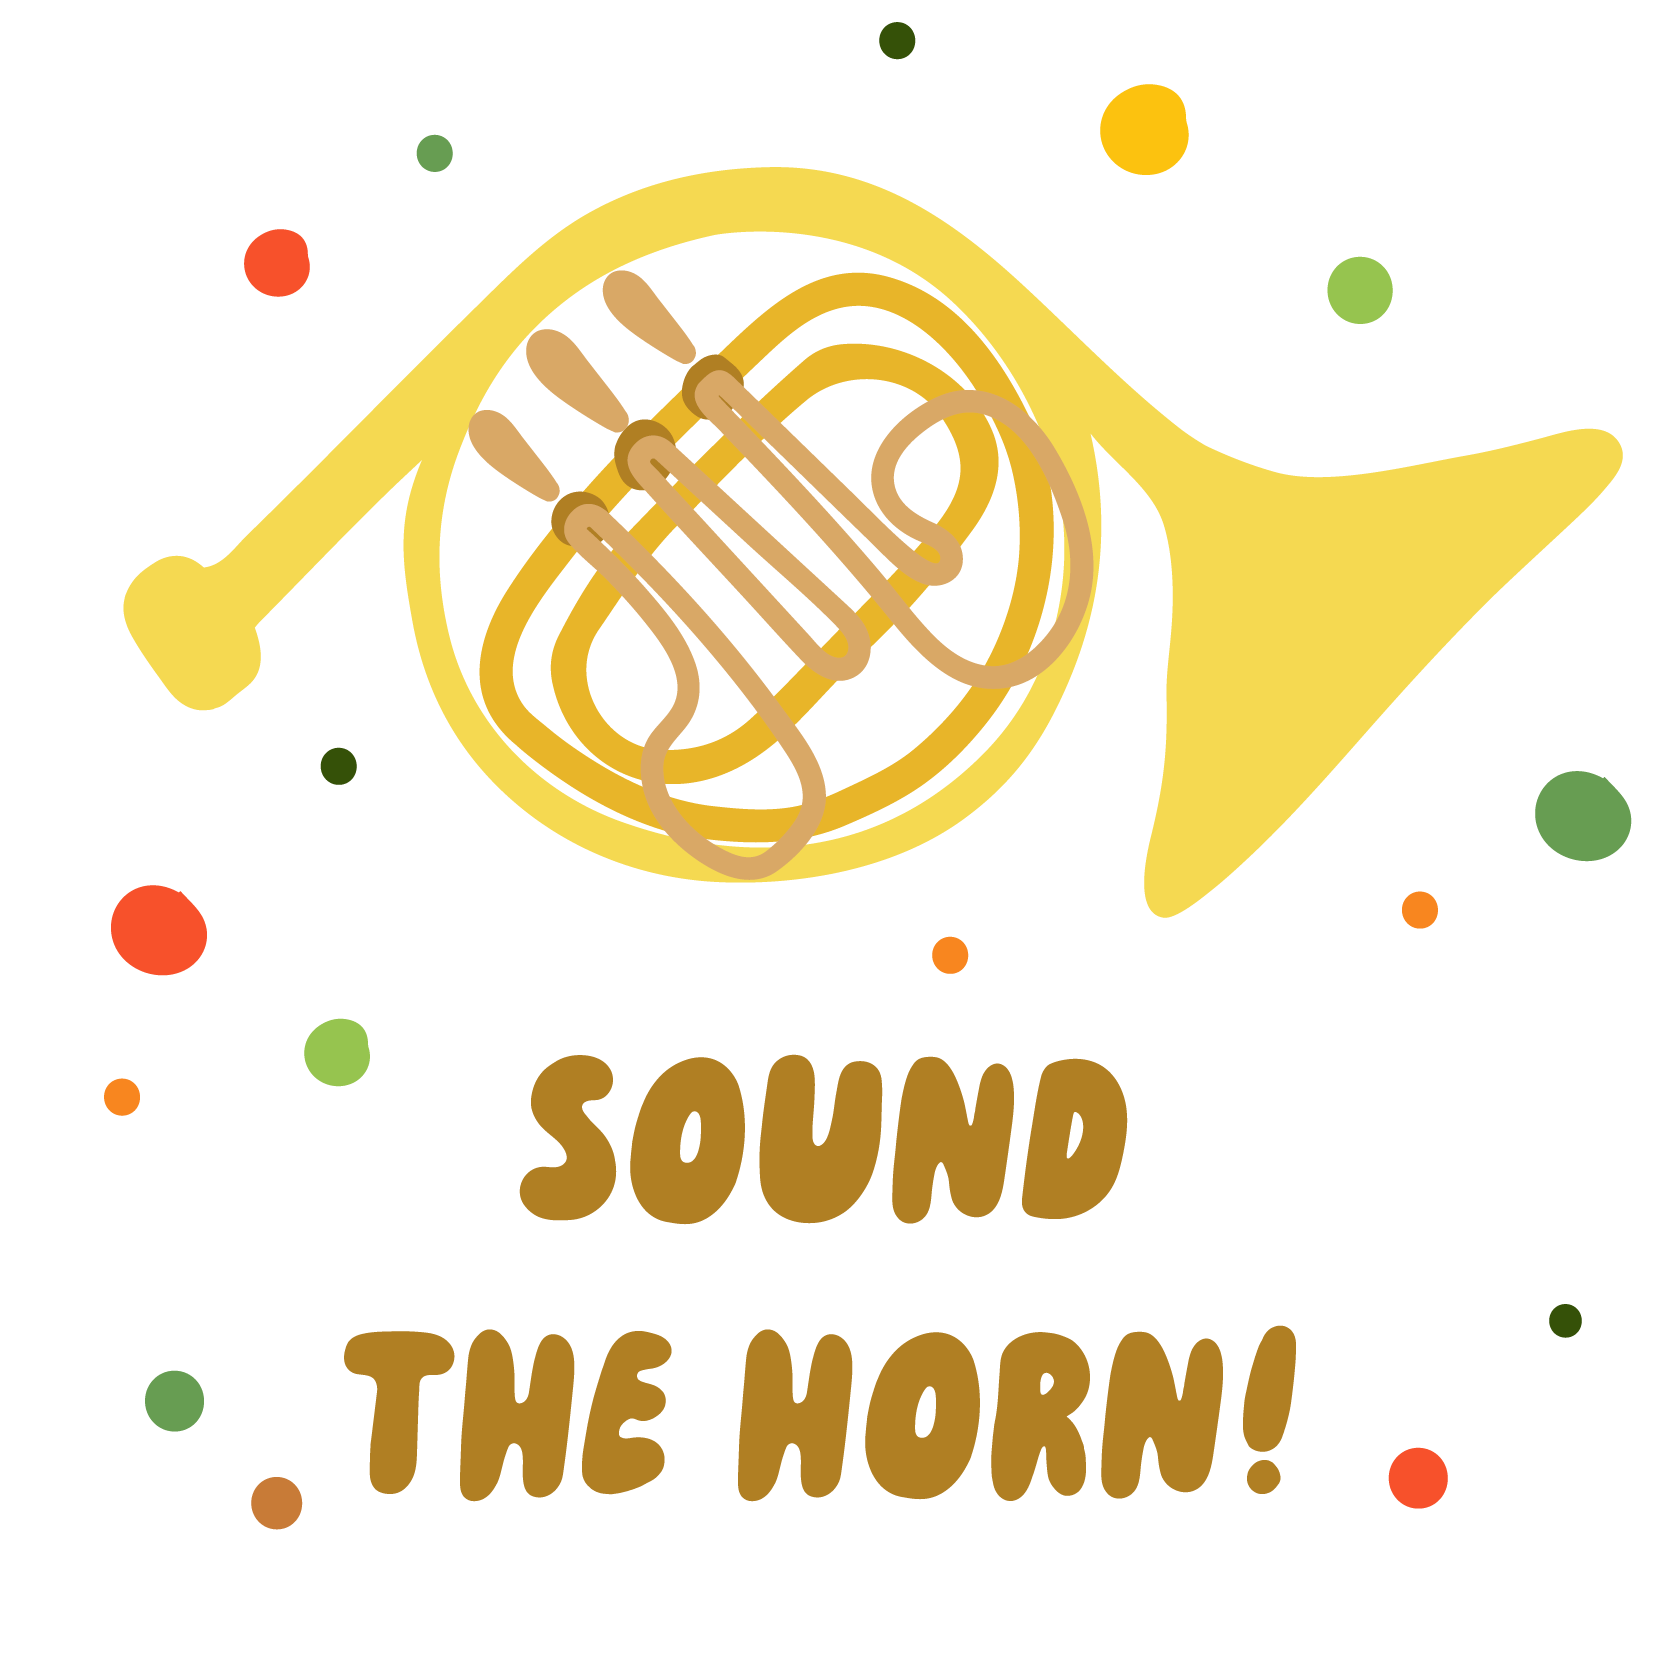 illustration of French horn "Sound the horn!"